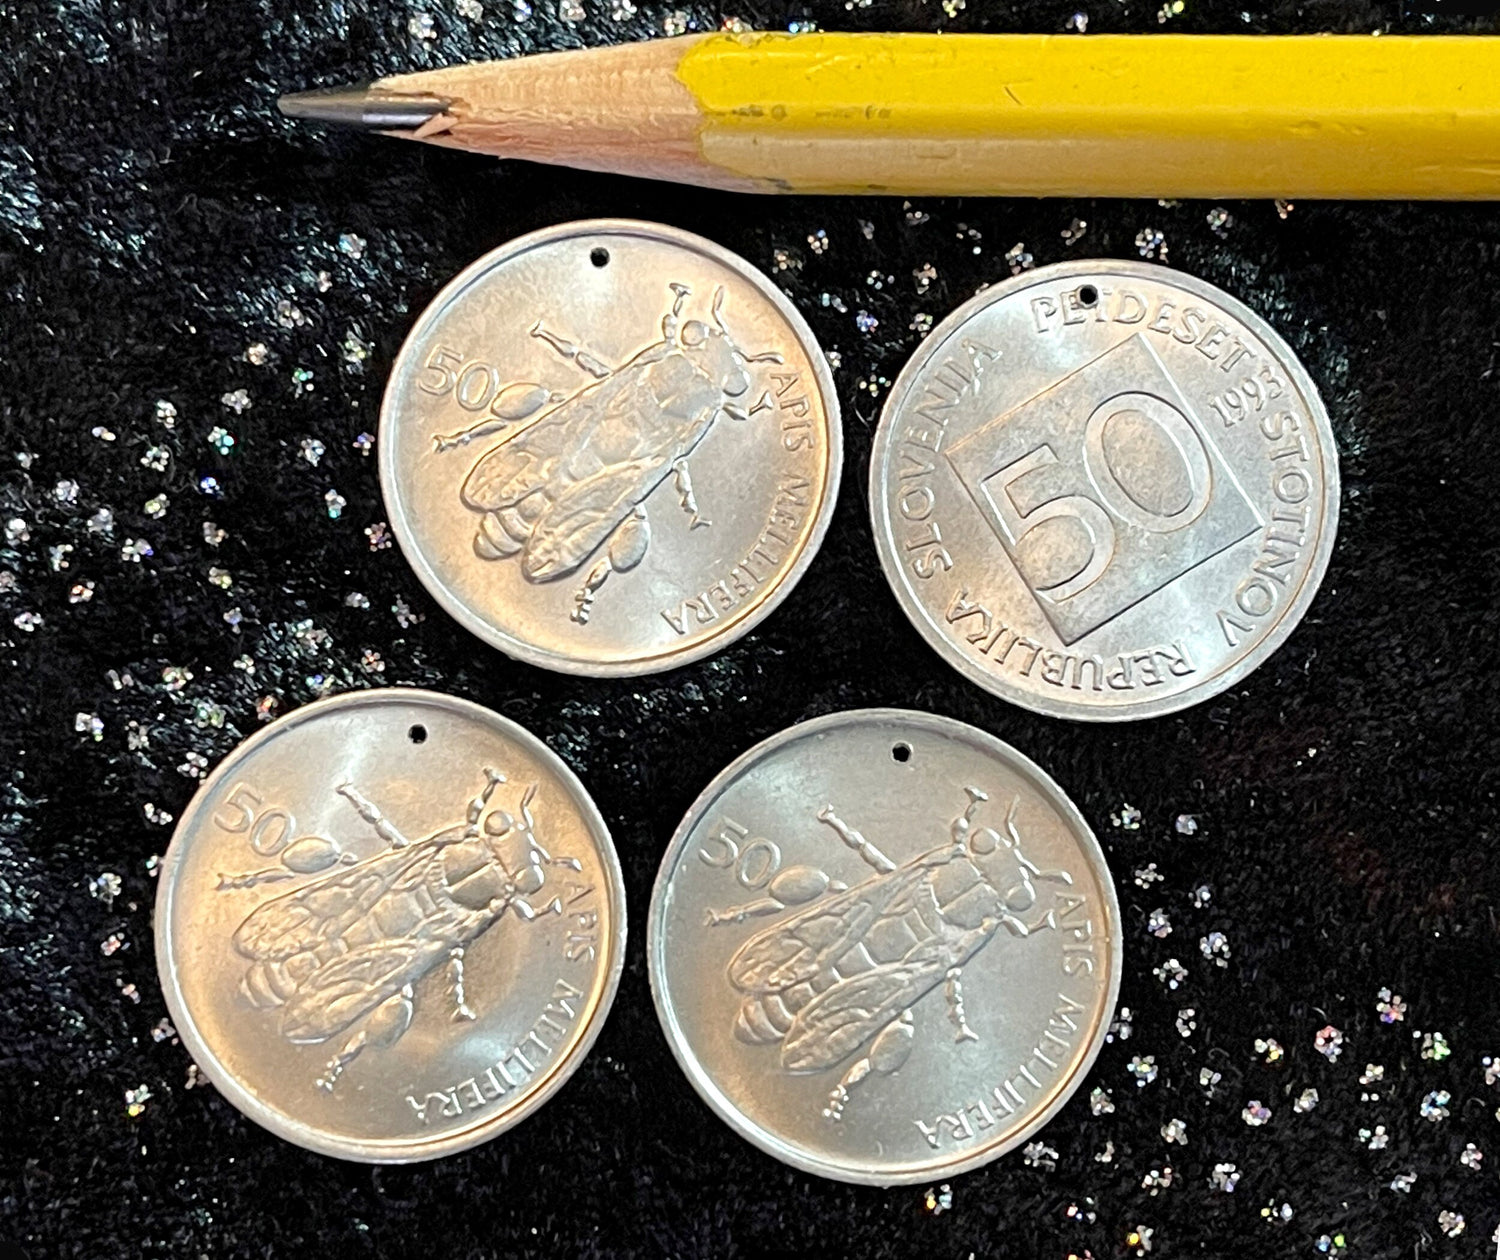 Drilling service - 4 holes in coins for 8.00 (applies to our products only -coins sold separately)